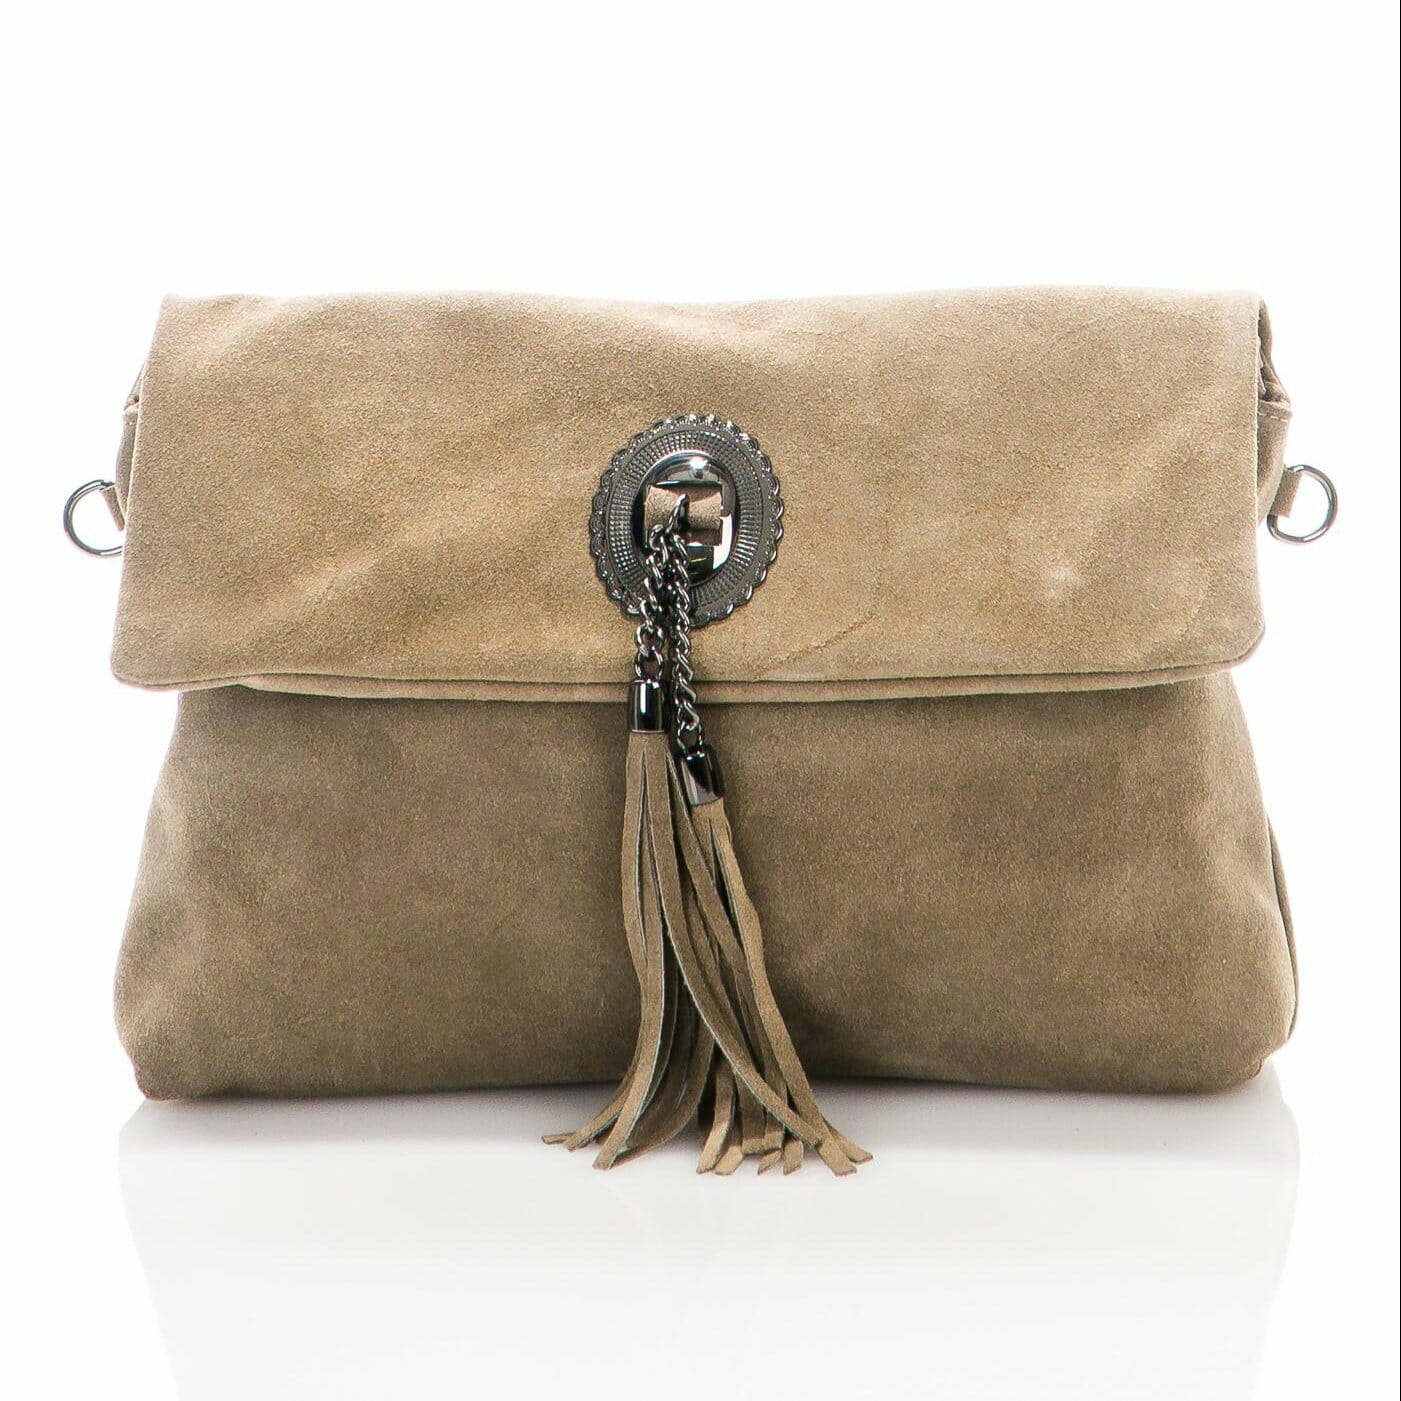 Titiana Genuine Suede Leather Bag - TAUPE